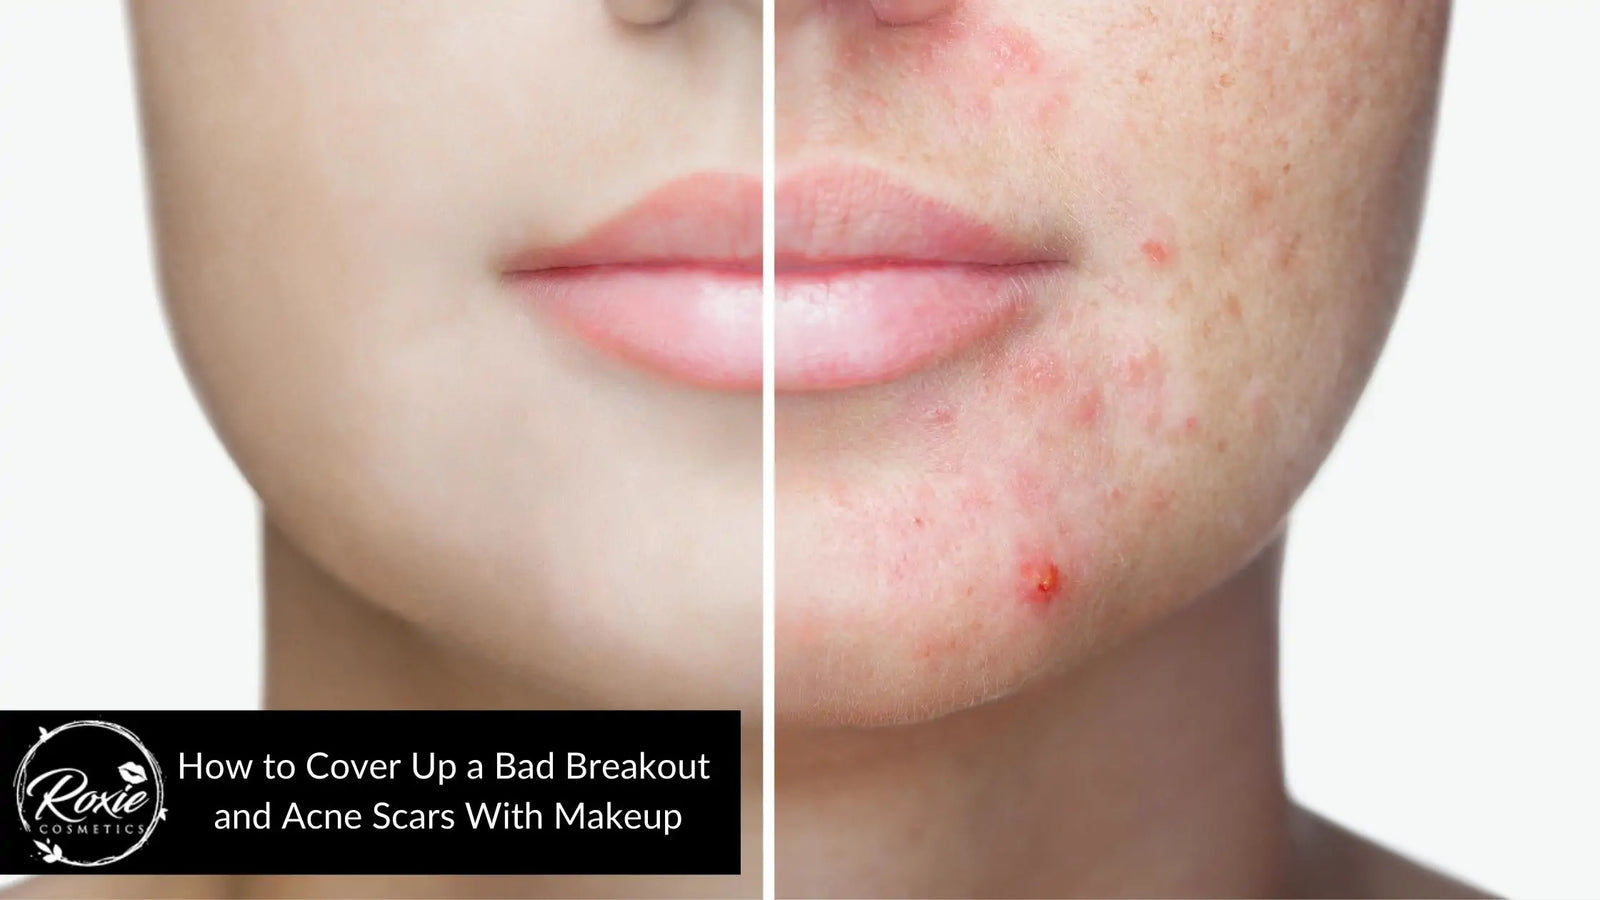 How to Cover Up a Bad Breakout and Acne Scars With Makeup